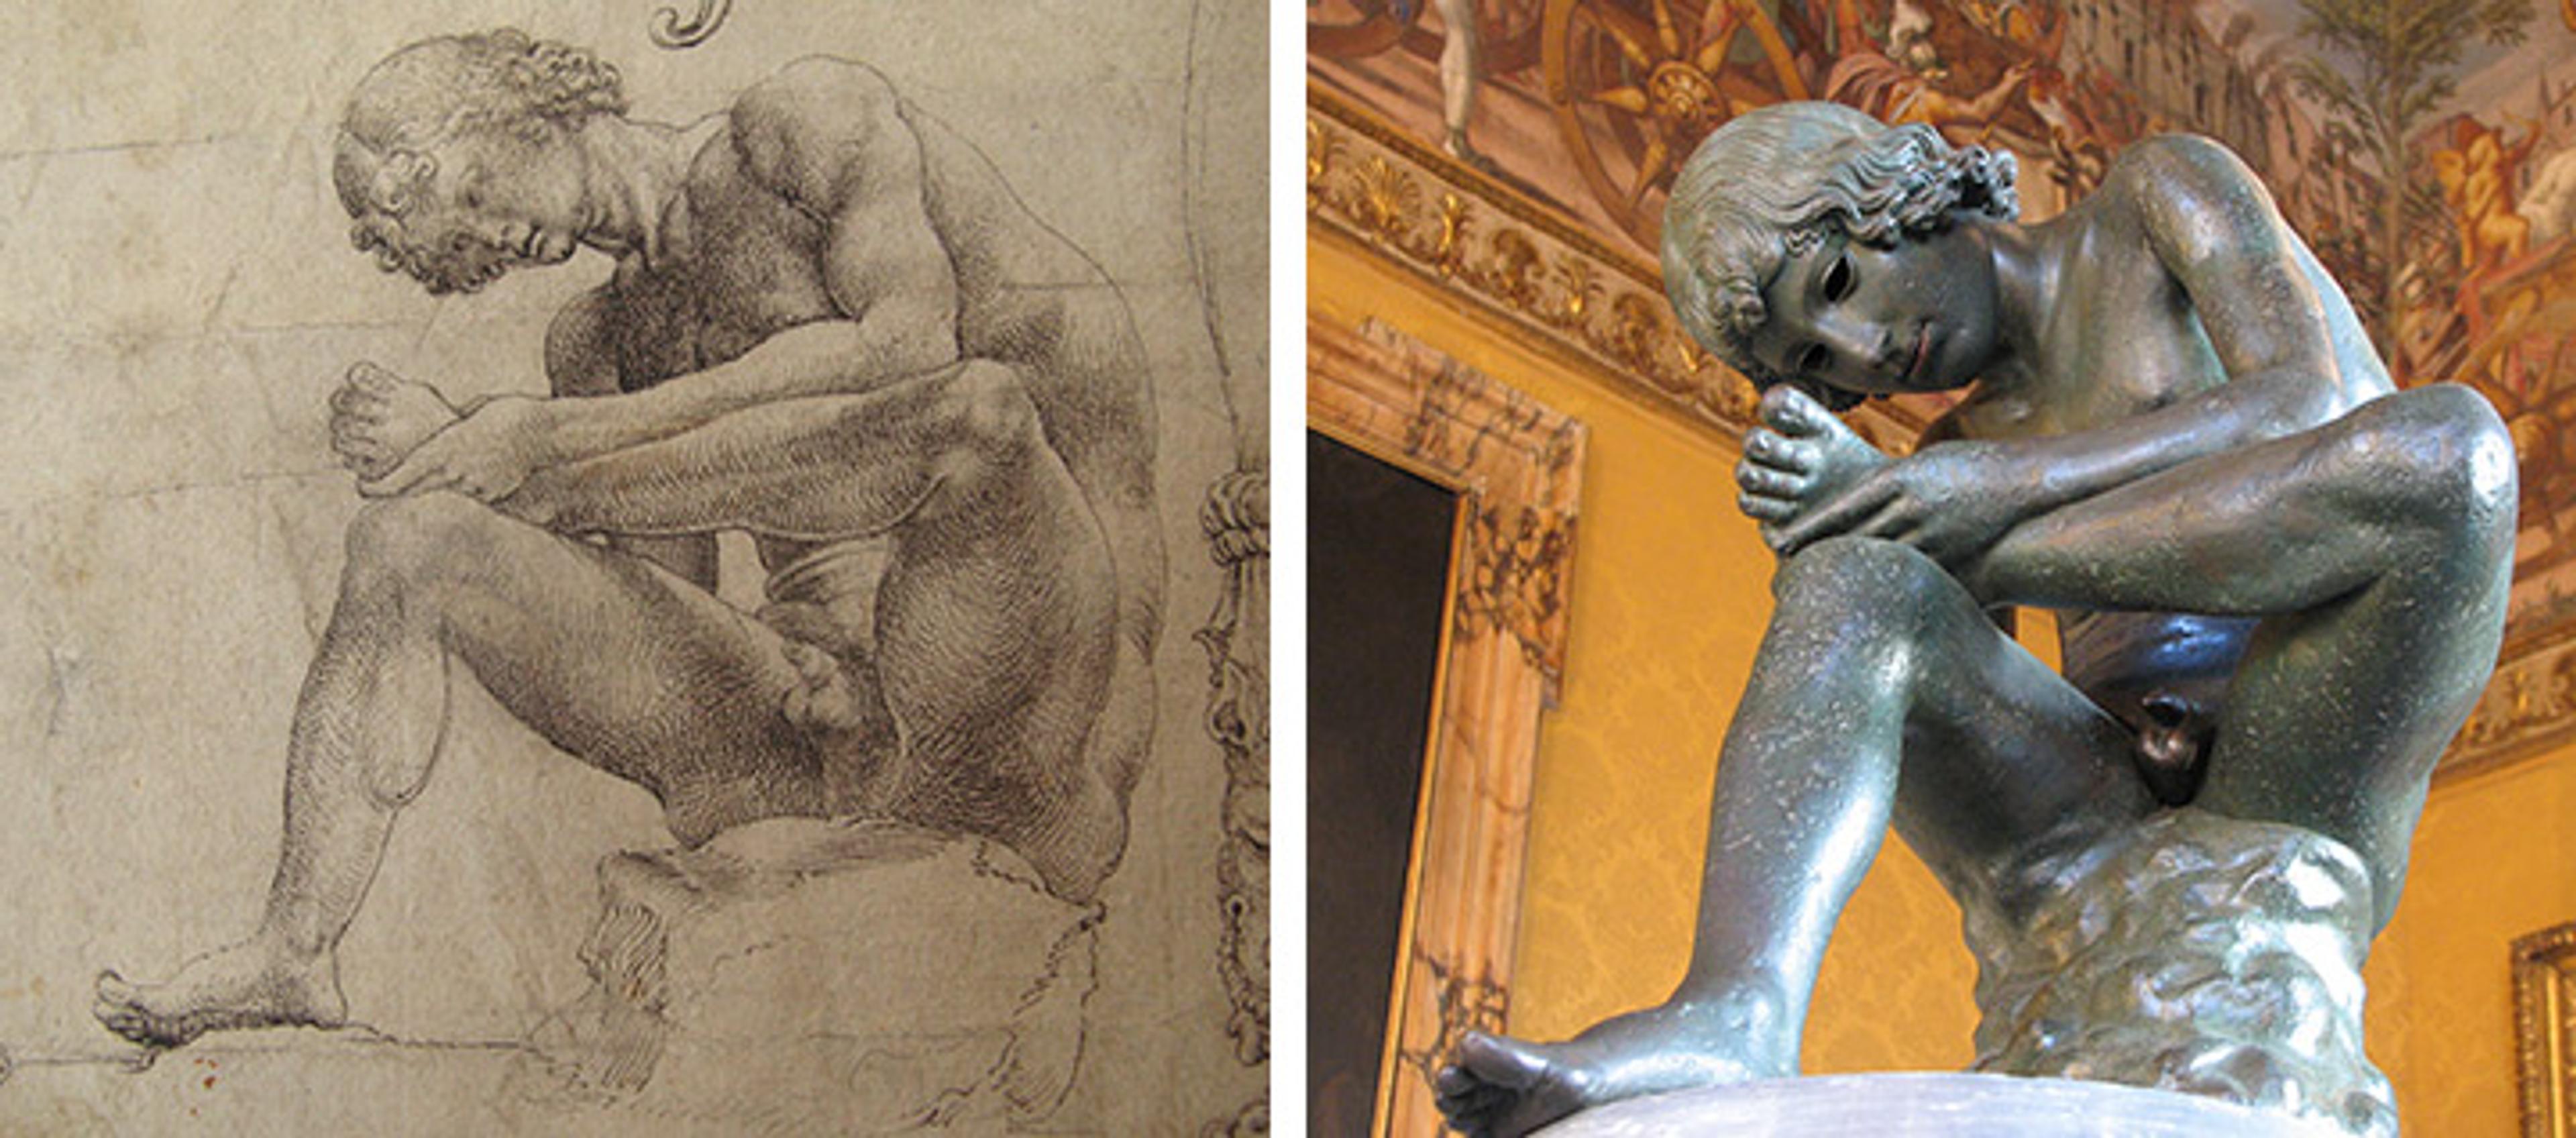 Drawing of nude boy removing thorn from foot on left; bronze sculpture of same boy on right